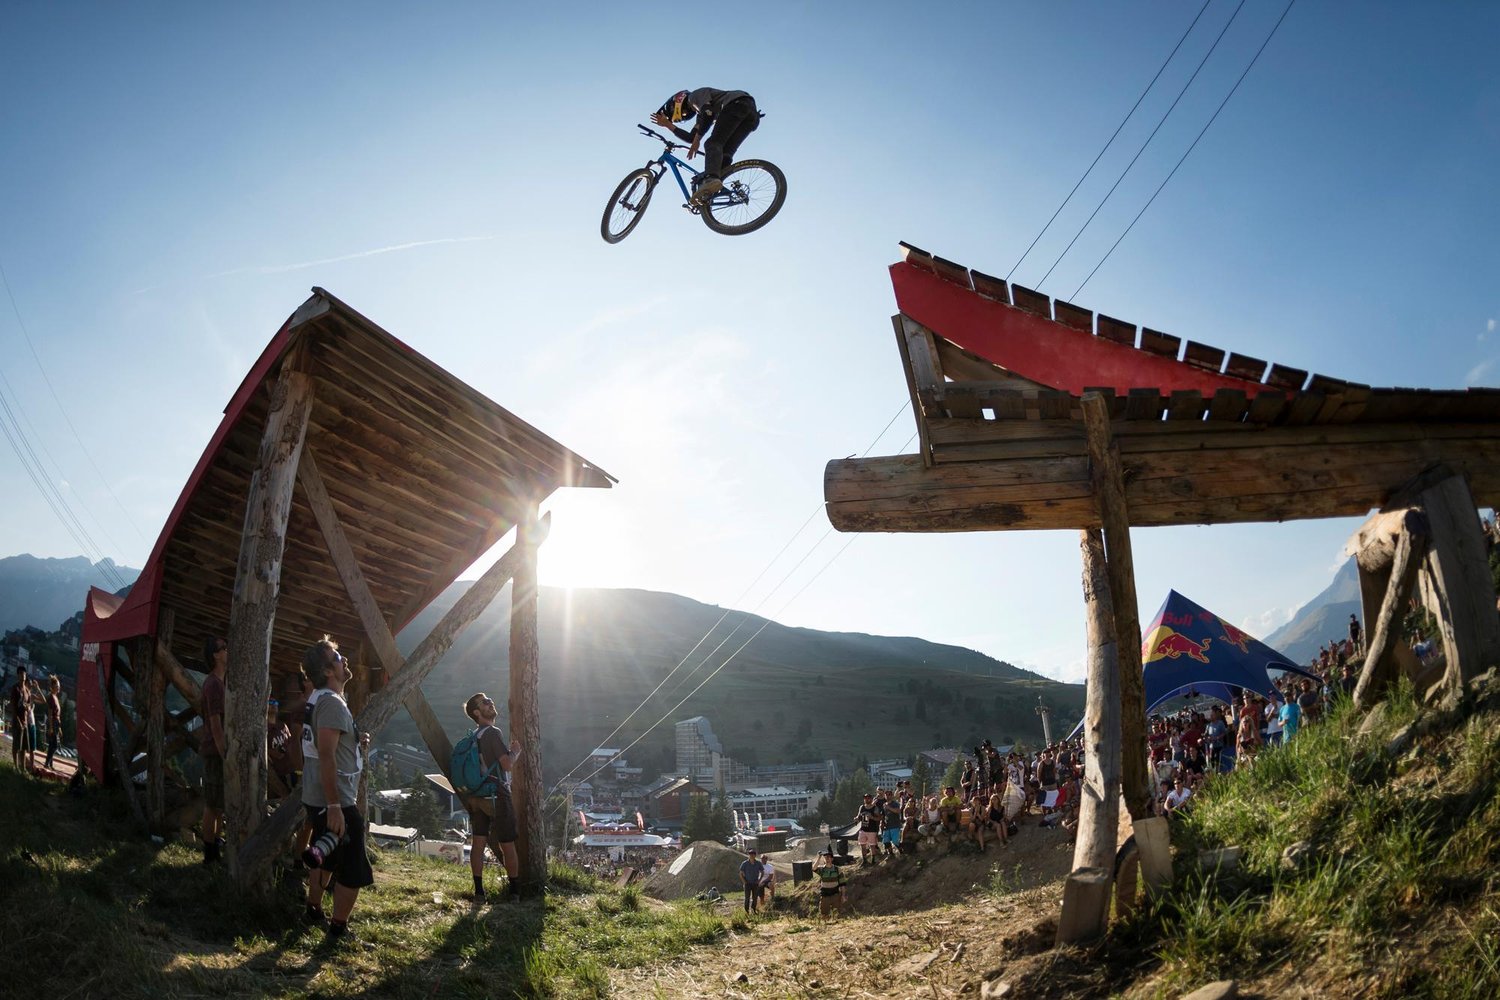 Anthony Messere performs at Crankworx Slopestyle in Les Deus Alpes, France on July 11th, 2015.